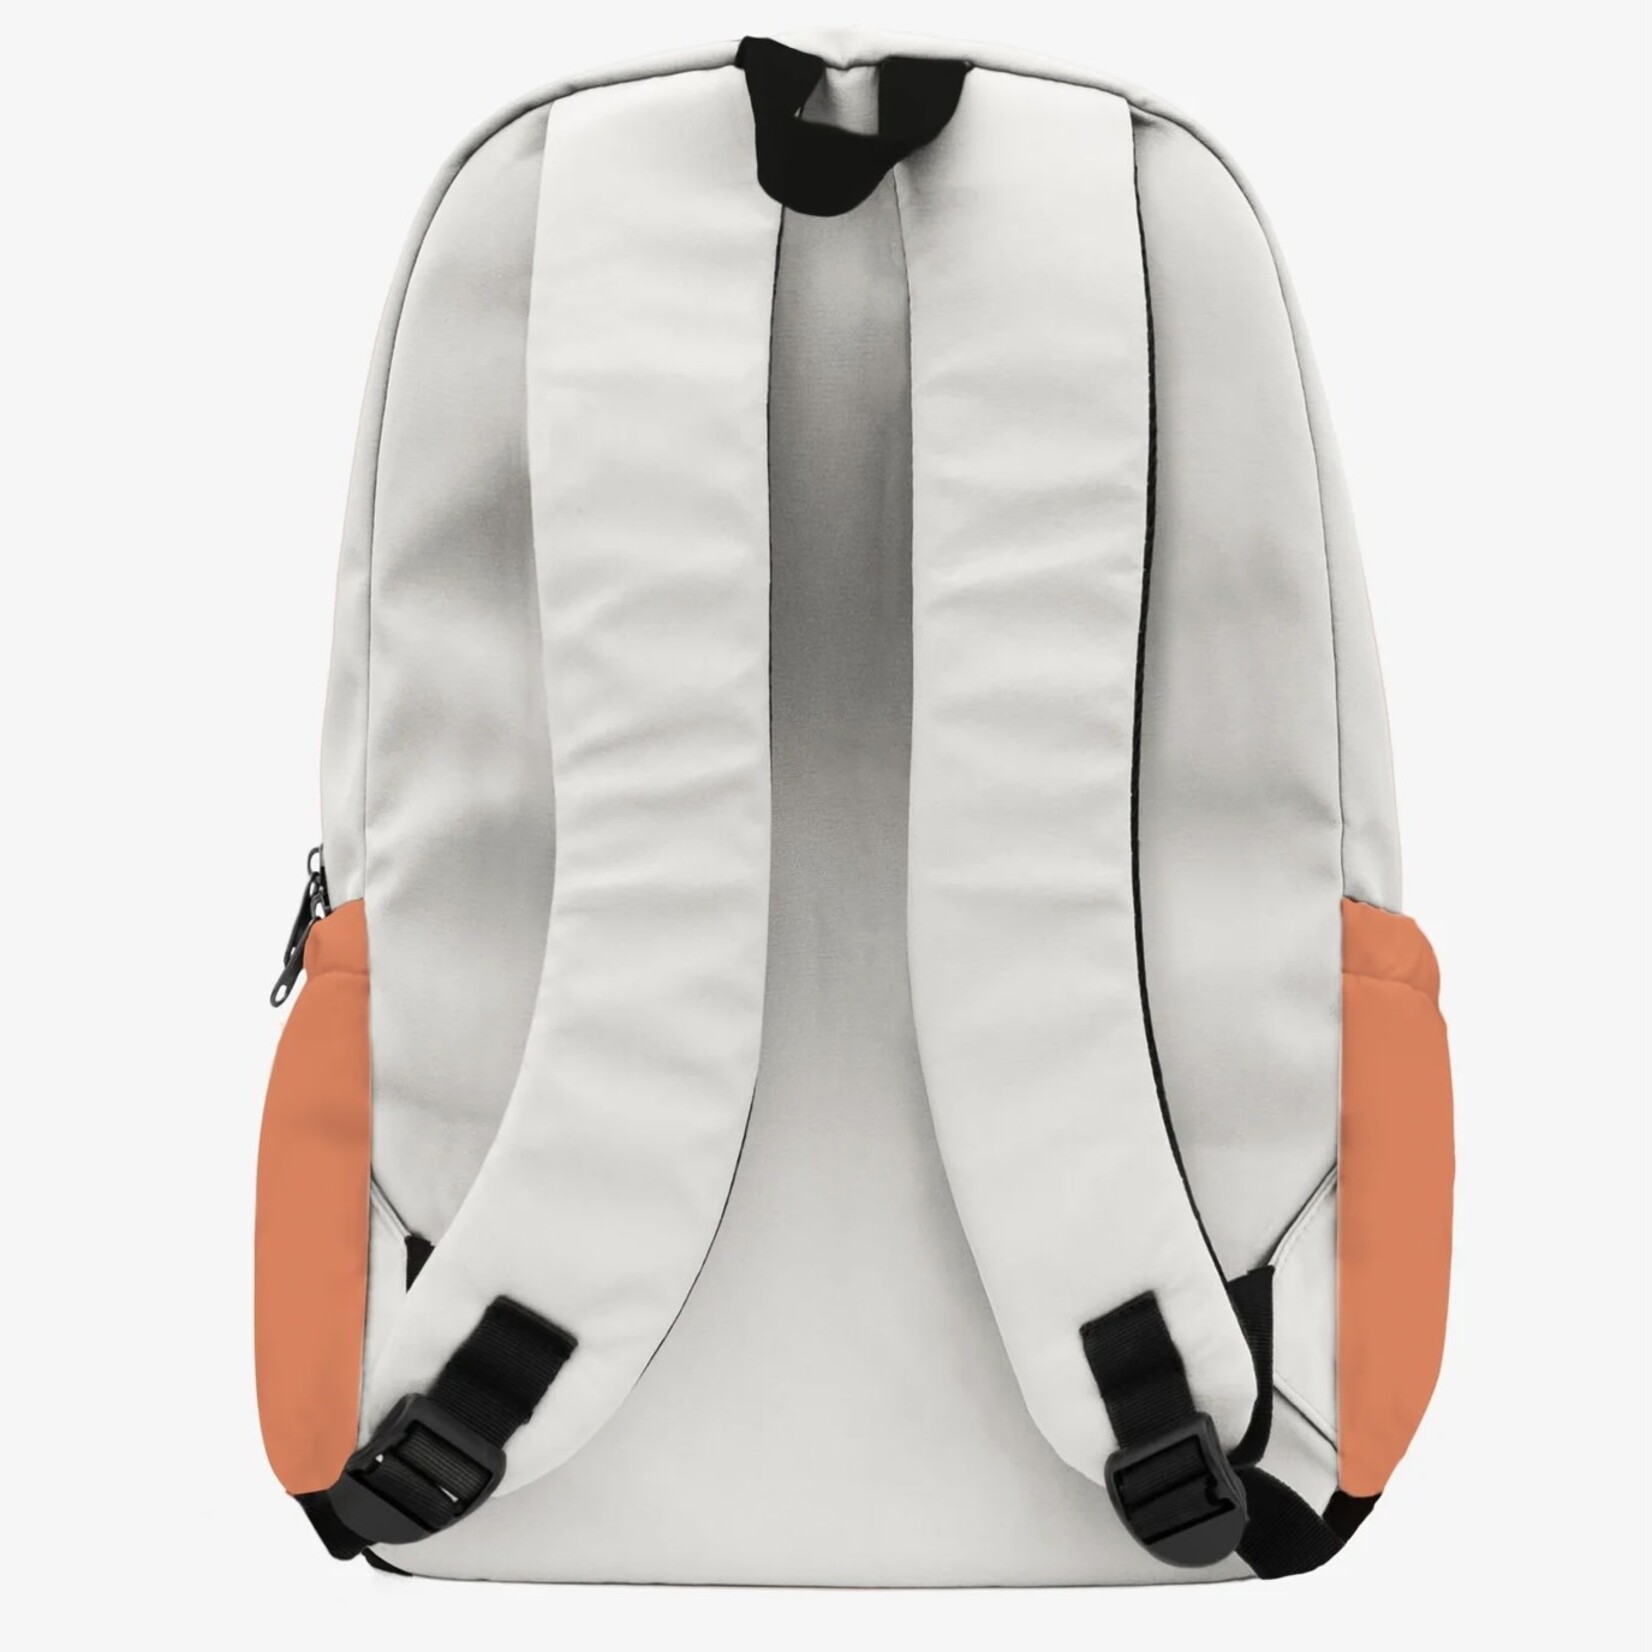 Headster Headster - Colorblock Backpack